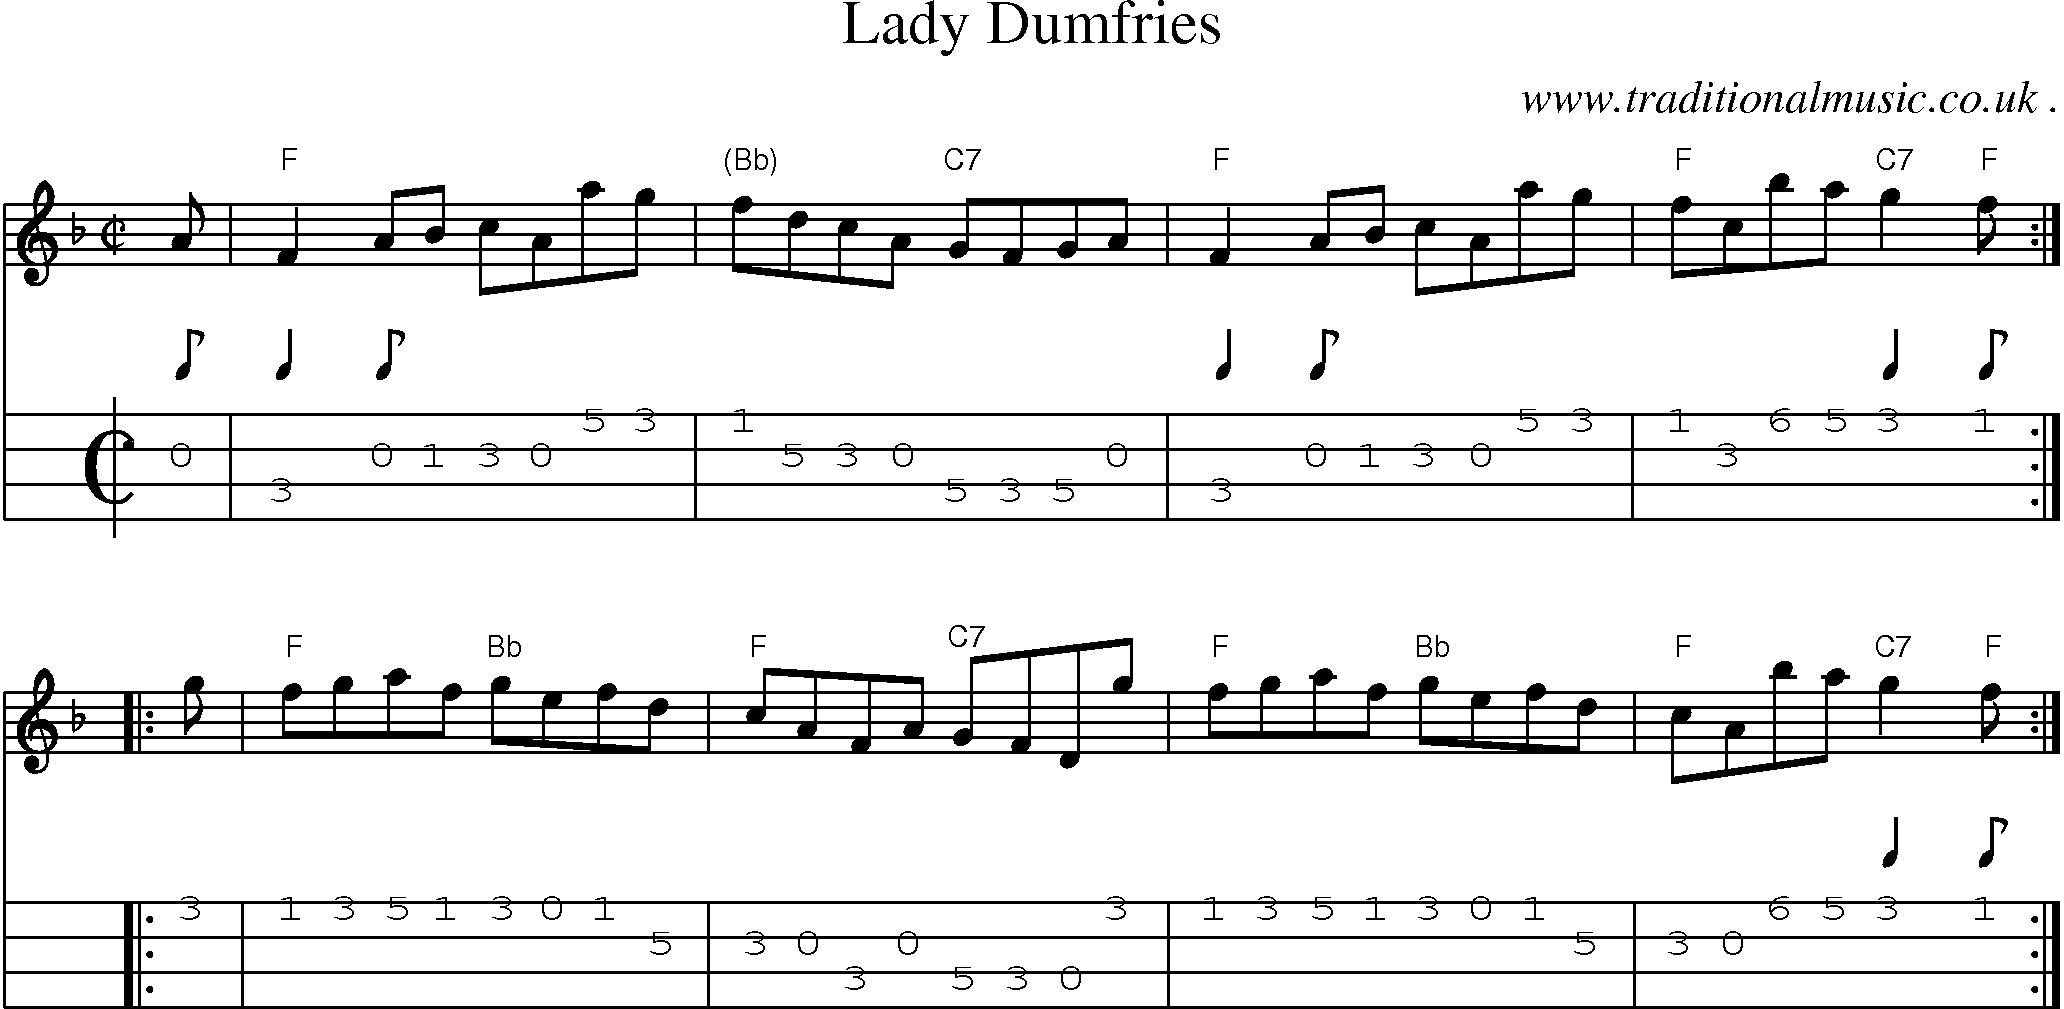 Sheet-music  score, Chords and Mandolin Tabs for Lady Dumfries